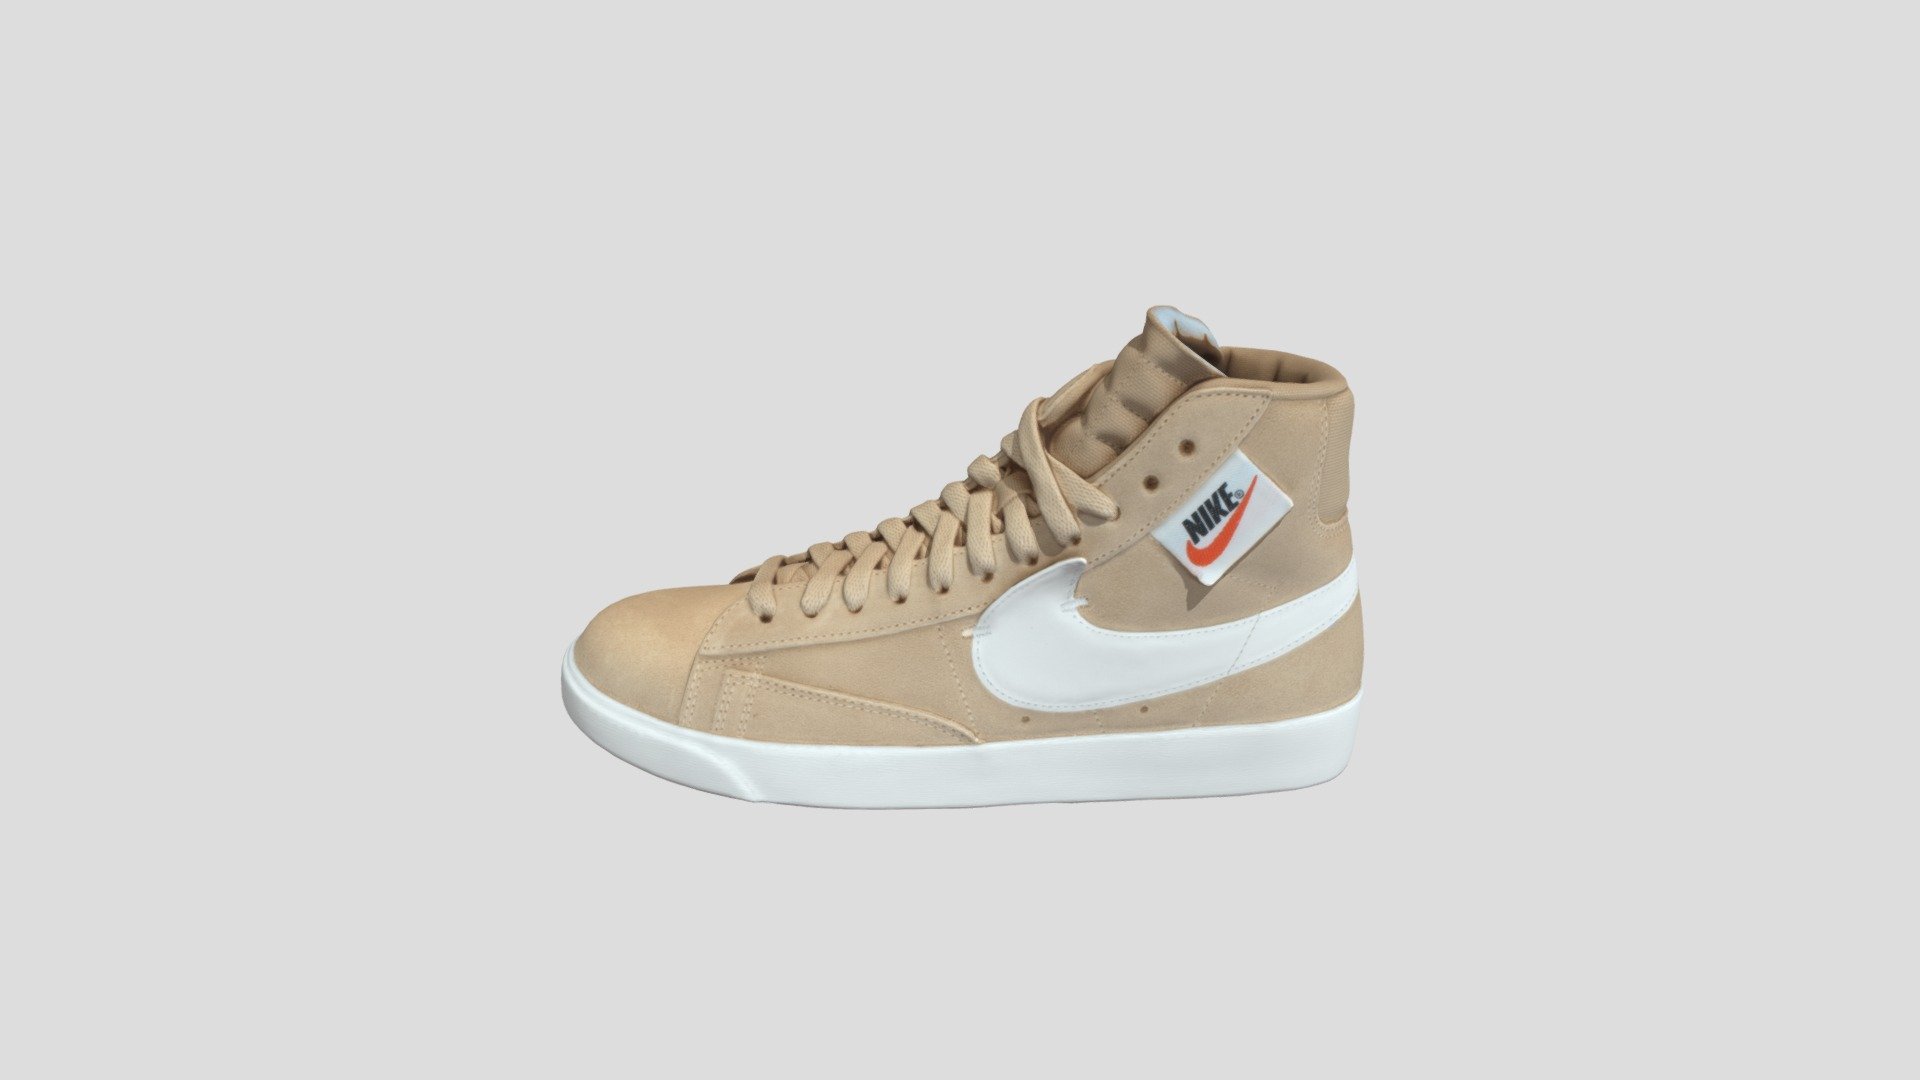 This model was created firstly by 3D scanning on retail version, and then being detail-improved manually, thus a 1:1 repulica of the original
PBR ready
Low-poly
4K texture
Welcome to check out other models we have to offer. And we do accept custom orders as well :) - Nike Blazer Mid Rebel 棕色 拉链_BQ4022-200 - Buy Royalty Free 3D model by TRARGUS 3d model